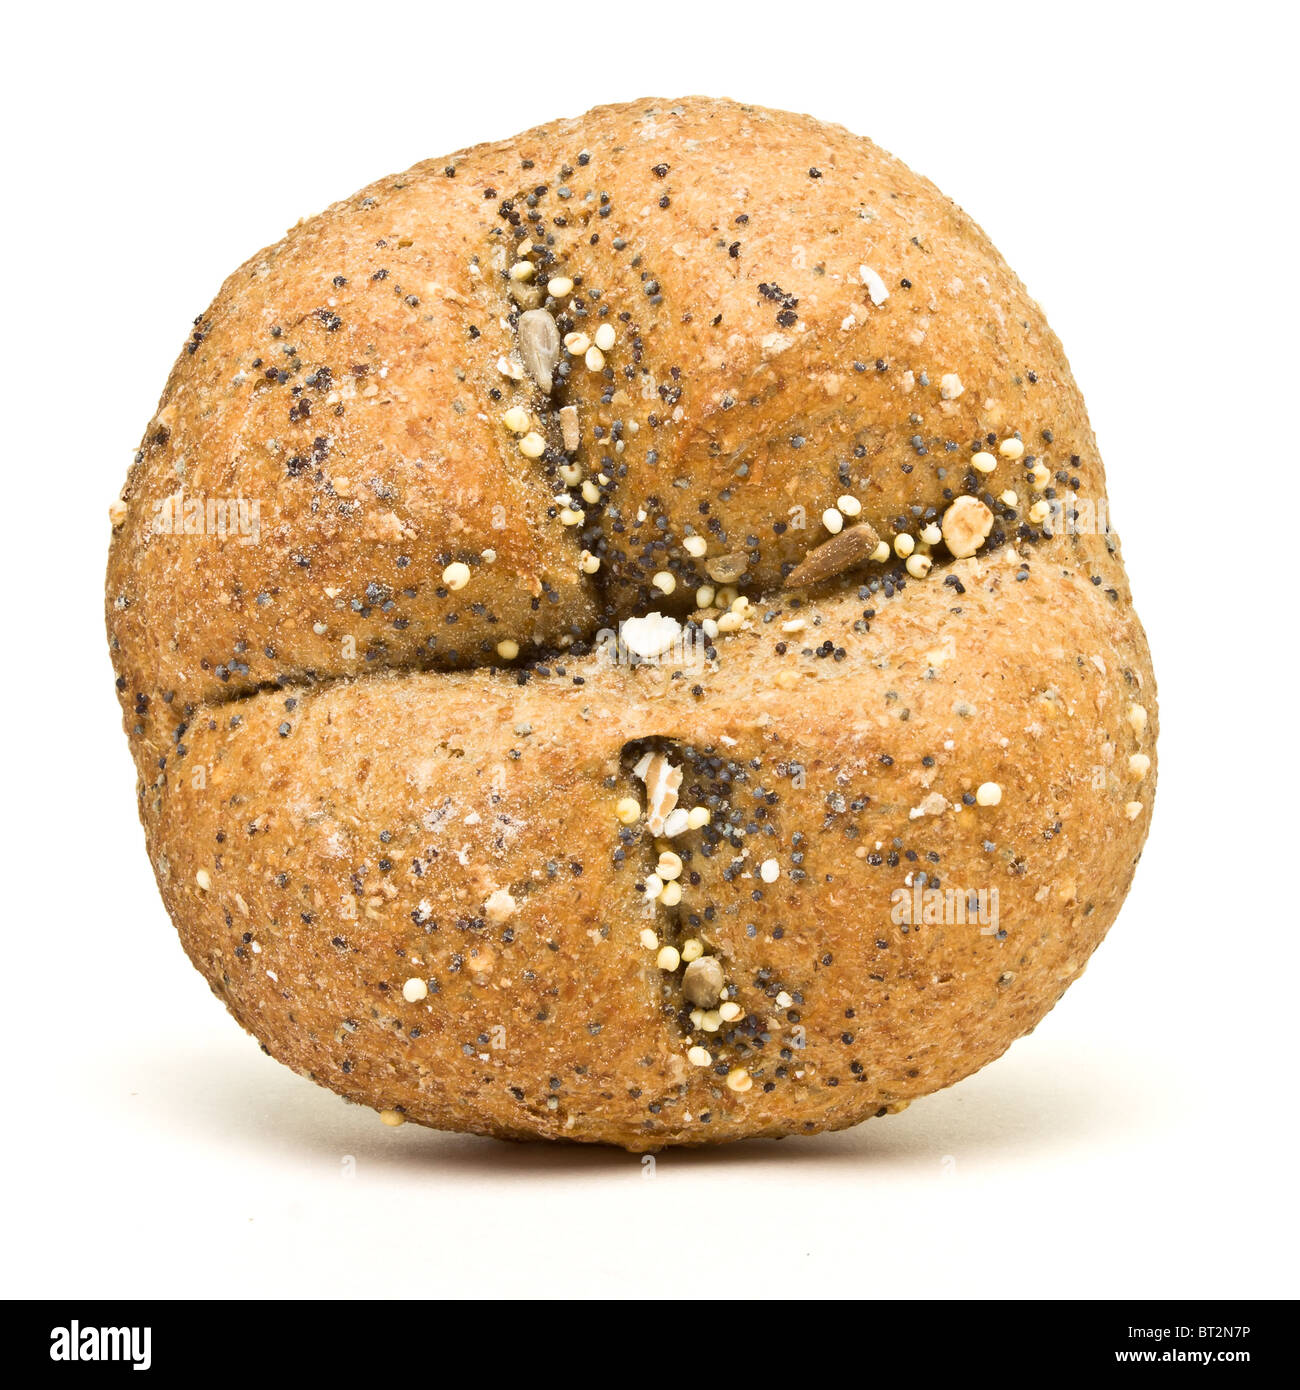 Handmade bread roll from low perspective isolated against white. Stock Photo